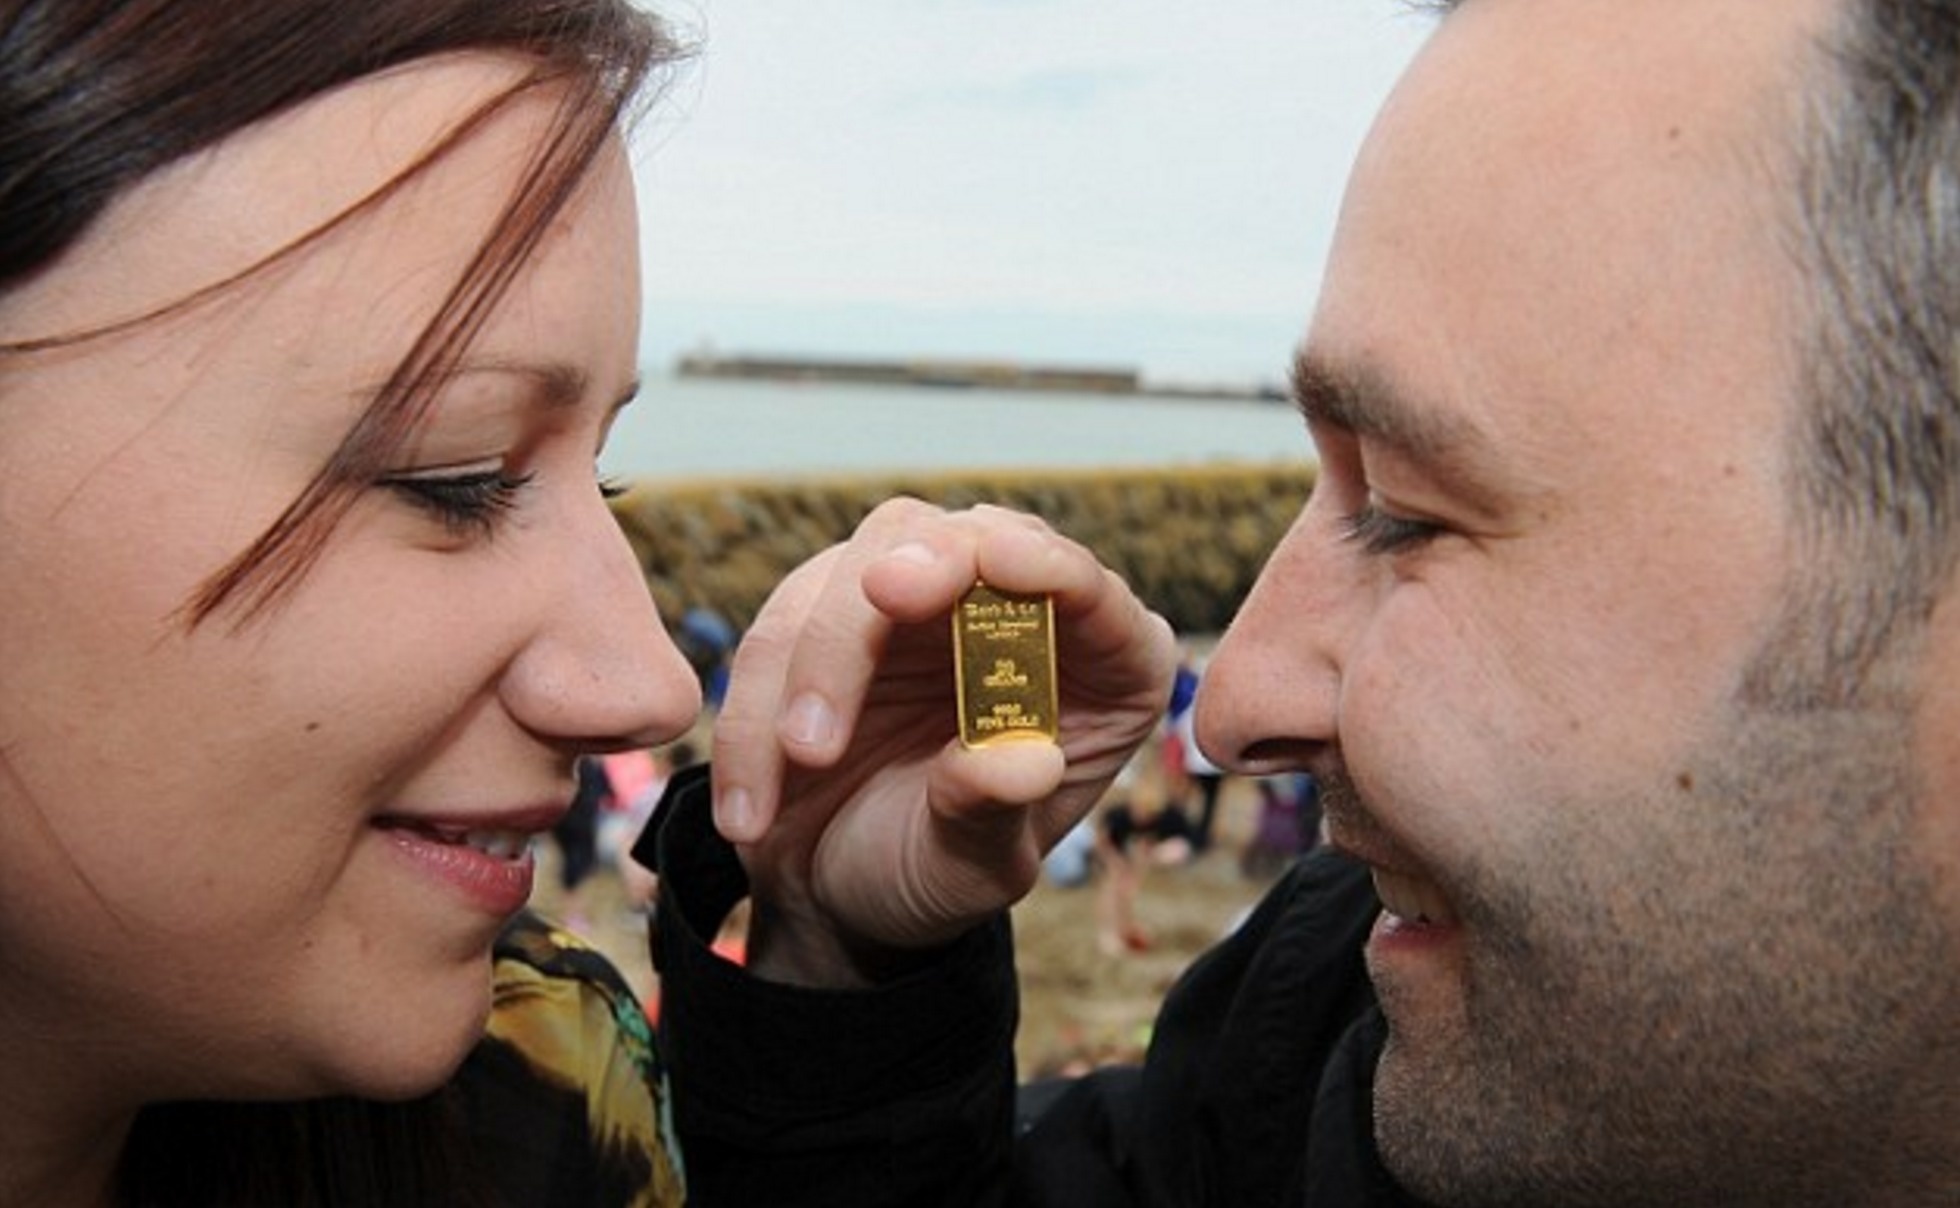 A couple from Kent, England dug up a 24-carat gold bar worth £500 on the beach. German artist Michael Sailstorfer hid 30 bars as part of a project. 